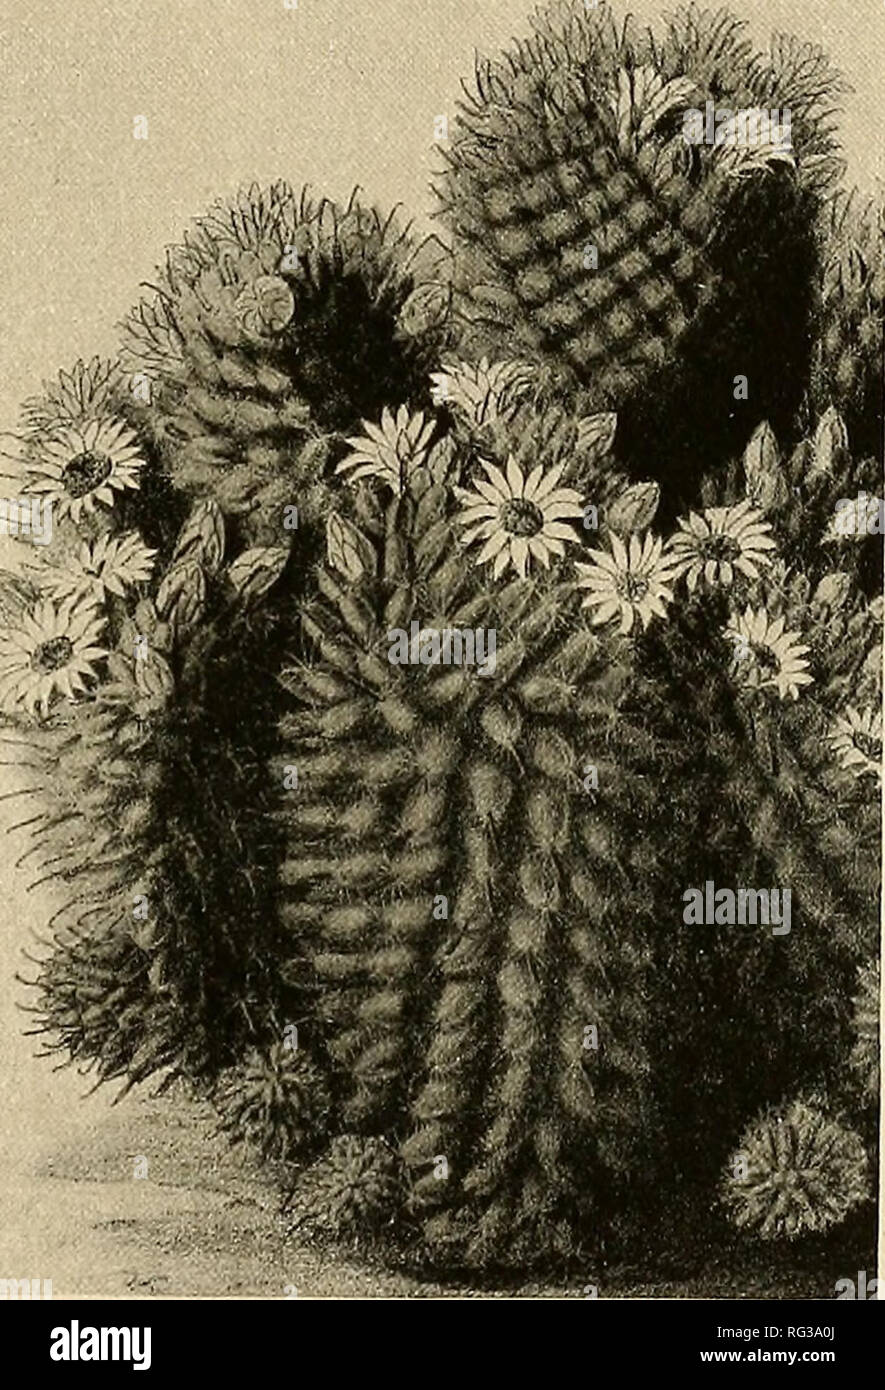 . The Cactaceae : descriptions and illustrations of plants of the cactus family. . Fig. 154.—Neomammillaria hamata. Fig. 155.—Neomammillaria wildii. The following are usually referred as sjoionyms of Mammillaria coronaria, but probably belong here: Mammillaria hamata brevispina and M. hamata principis Salm-Dyck (Labouret, Monogr. Cact. 34. 1853) and M. hamata longispina Salm-Dyck (Cact. Hort. Dyck. 1844. 8. 1845). Mammillaria principis Monville (Labouret, Monogr. Cact. 34. 1853) was given as a synonym of the last variety here cited. Illustration: Ortega, Nov. Rar. PI. pi. 16, as Cactus cylindr Stock Photo